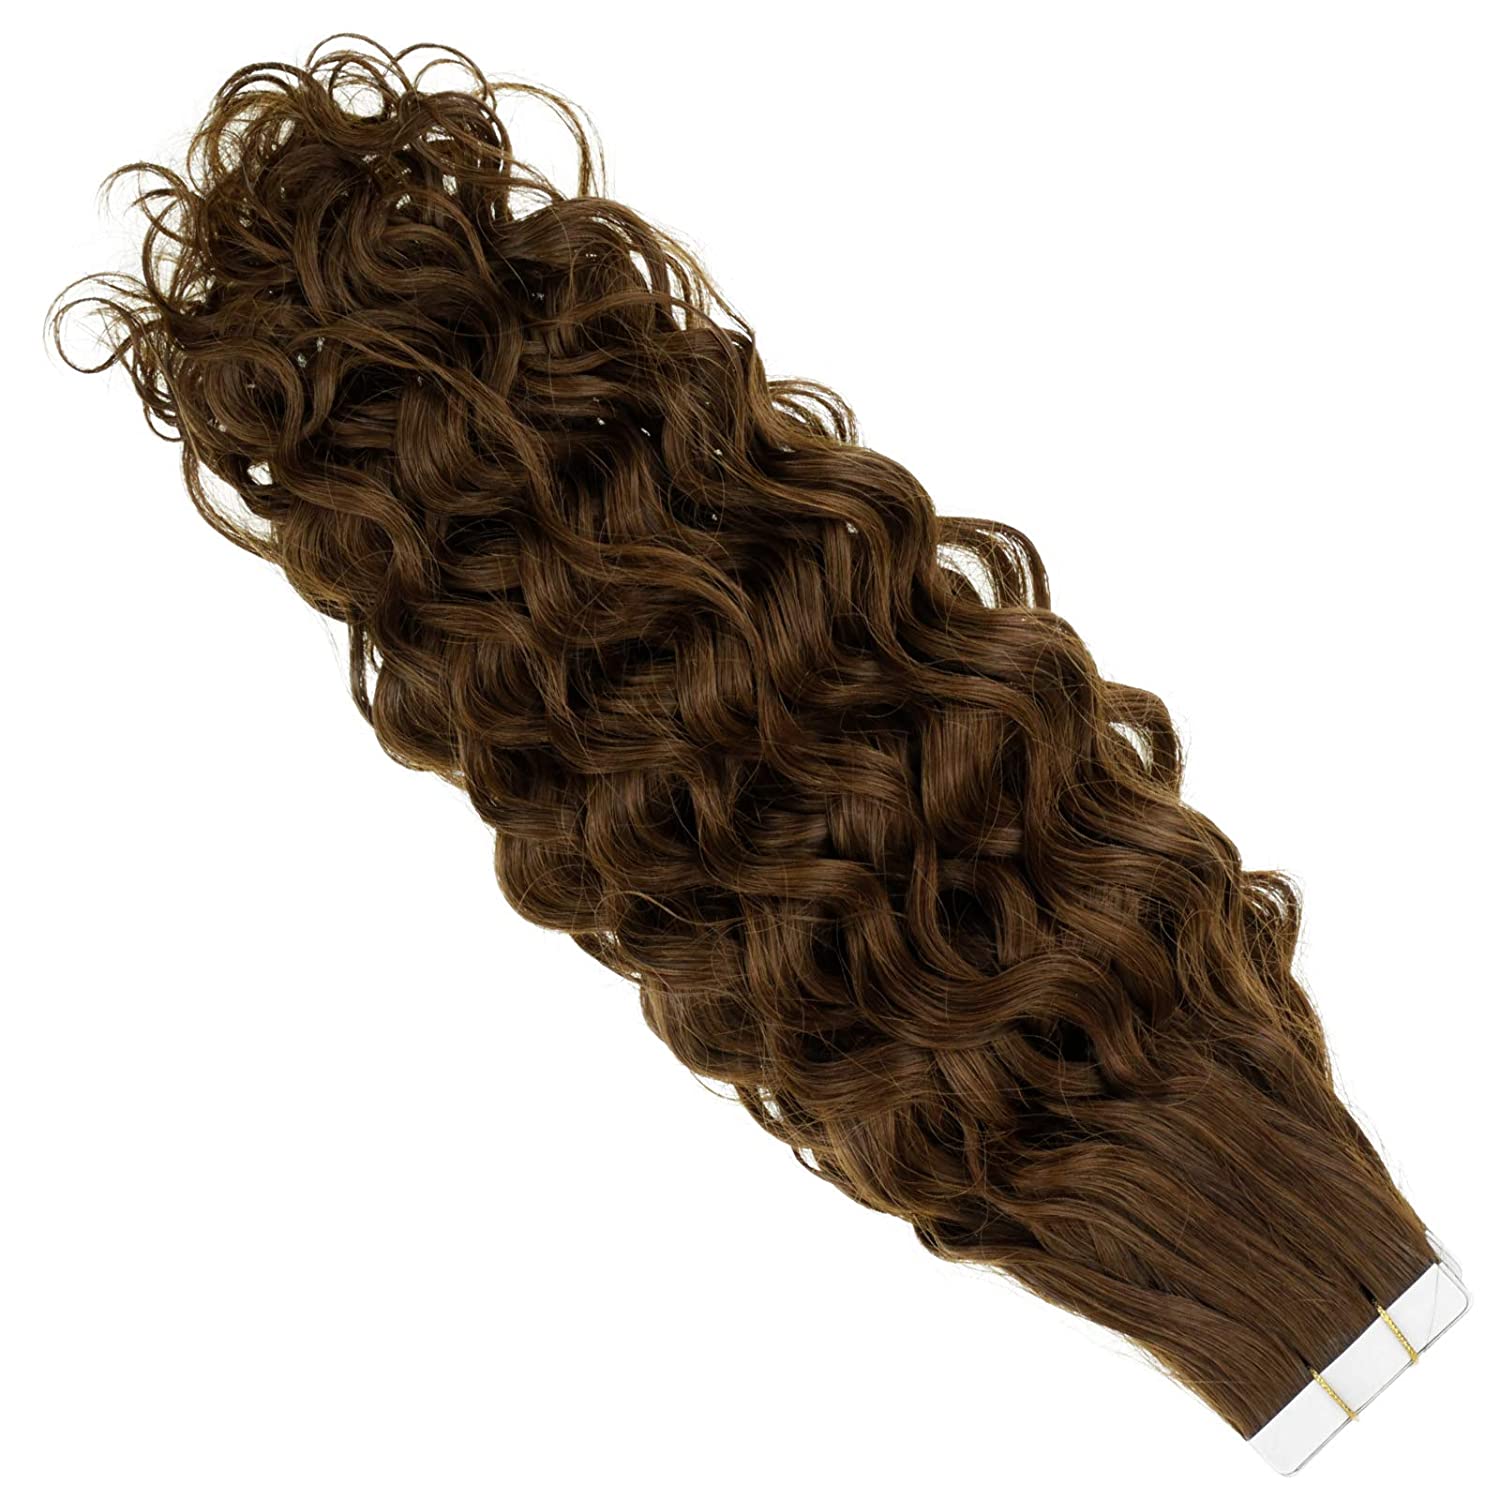 Easyouth Tape in Curly Hair Extensions Human Hair Natural Wave #4NW